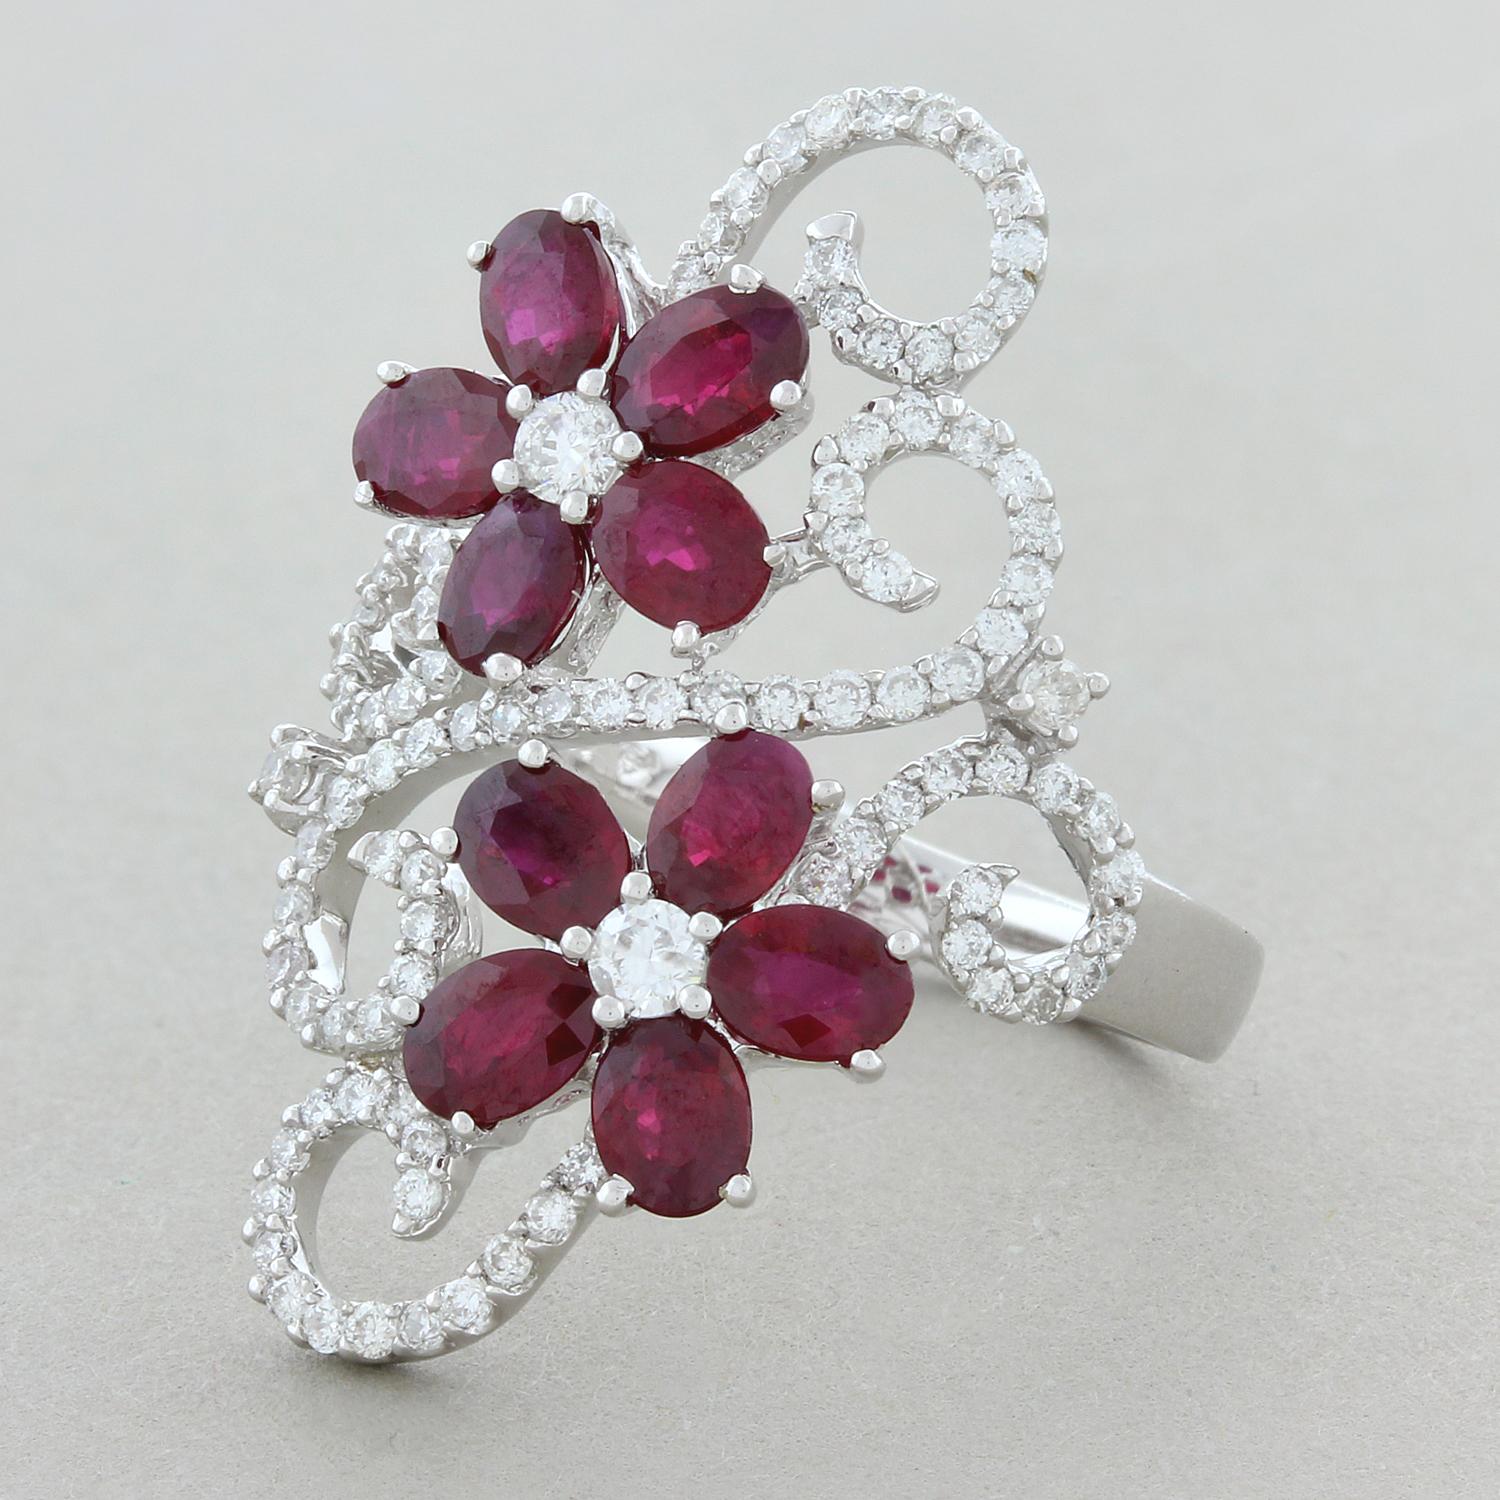 This everyday navette style cocktail ring features two side-by-side flower clusters. The two flowers are comprised of 2.28 carats of fine vivid red oval cut rubies and 0.70 carats of sparkling round brilliant cut diamonds which accent the rubies